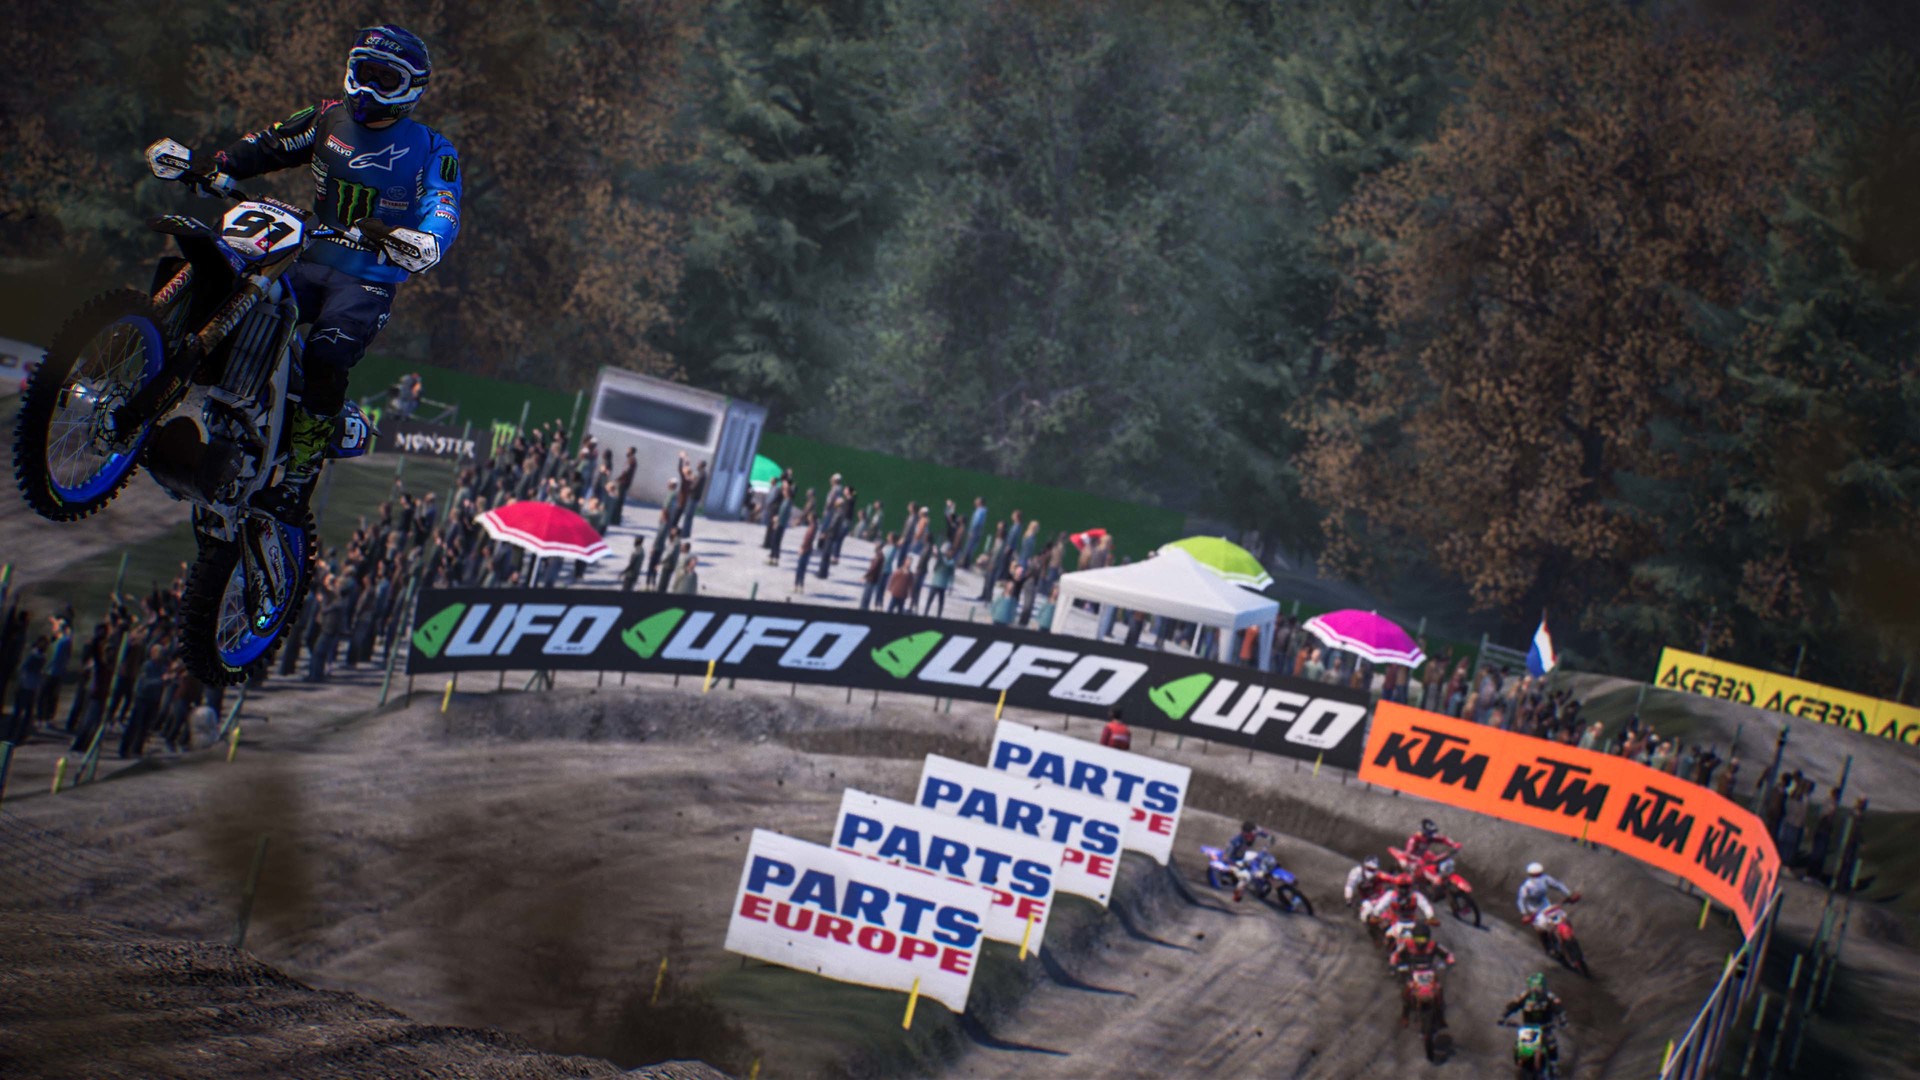 MXGP 2021 - The Official Motocross Videogame Free Download